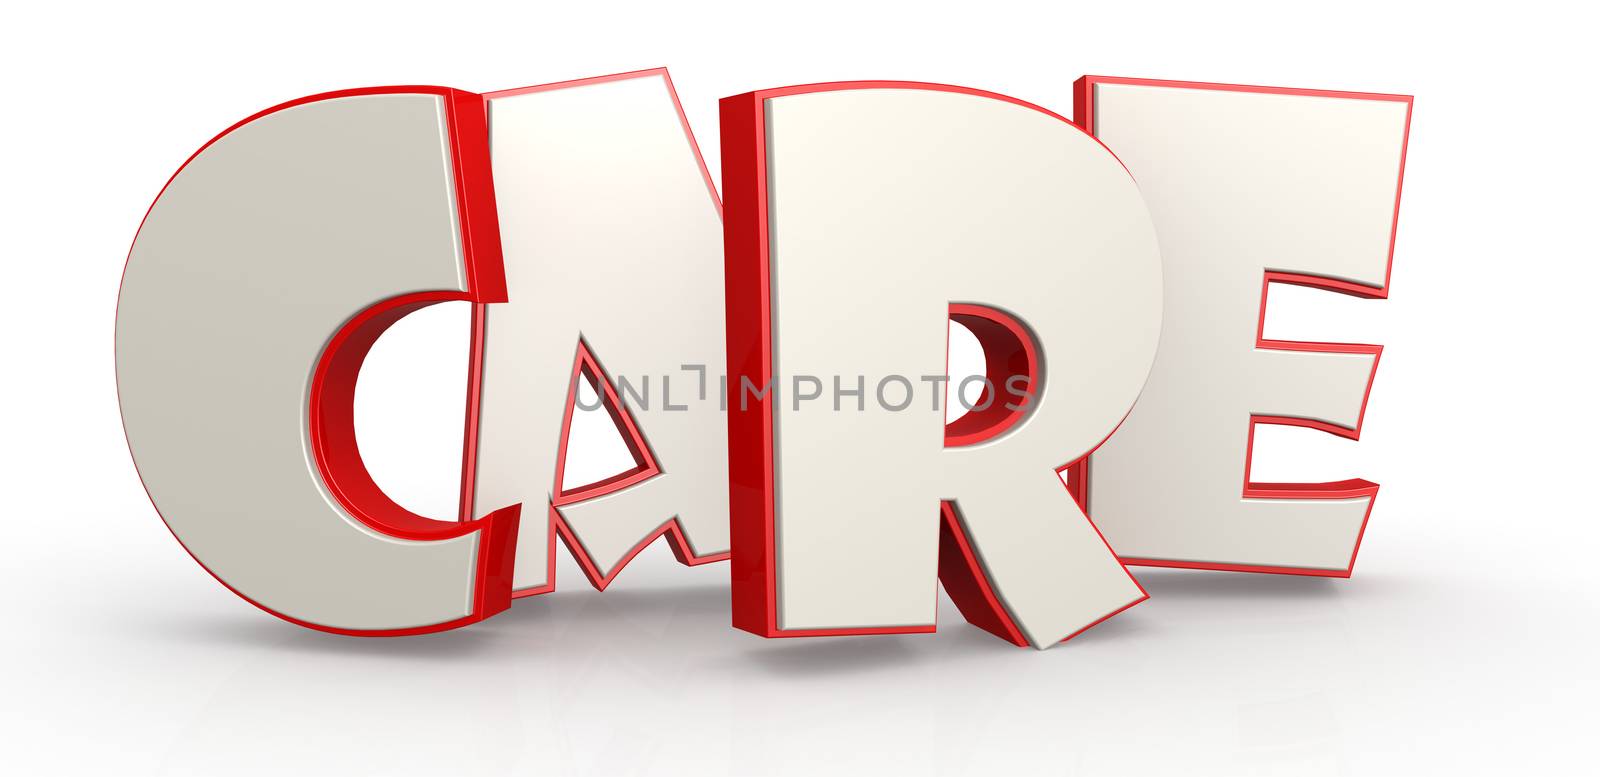 Care word with white background image with hi-res rendered artwork that could be used for any graphic design.